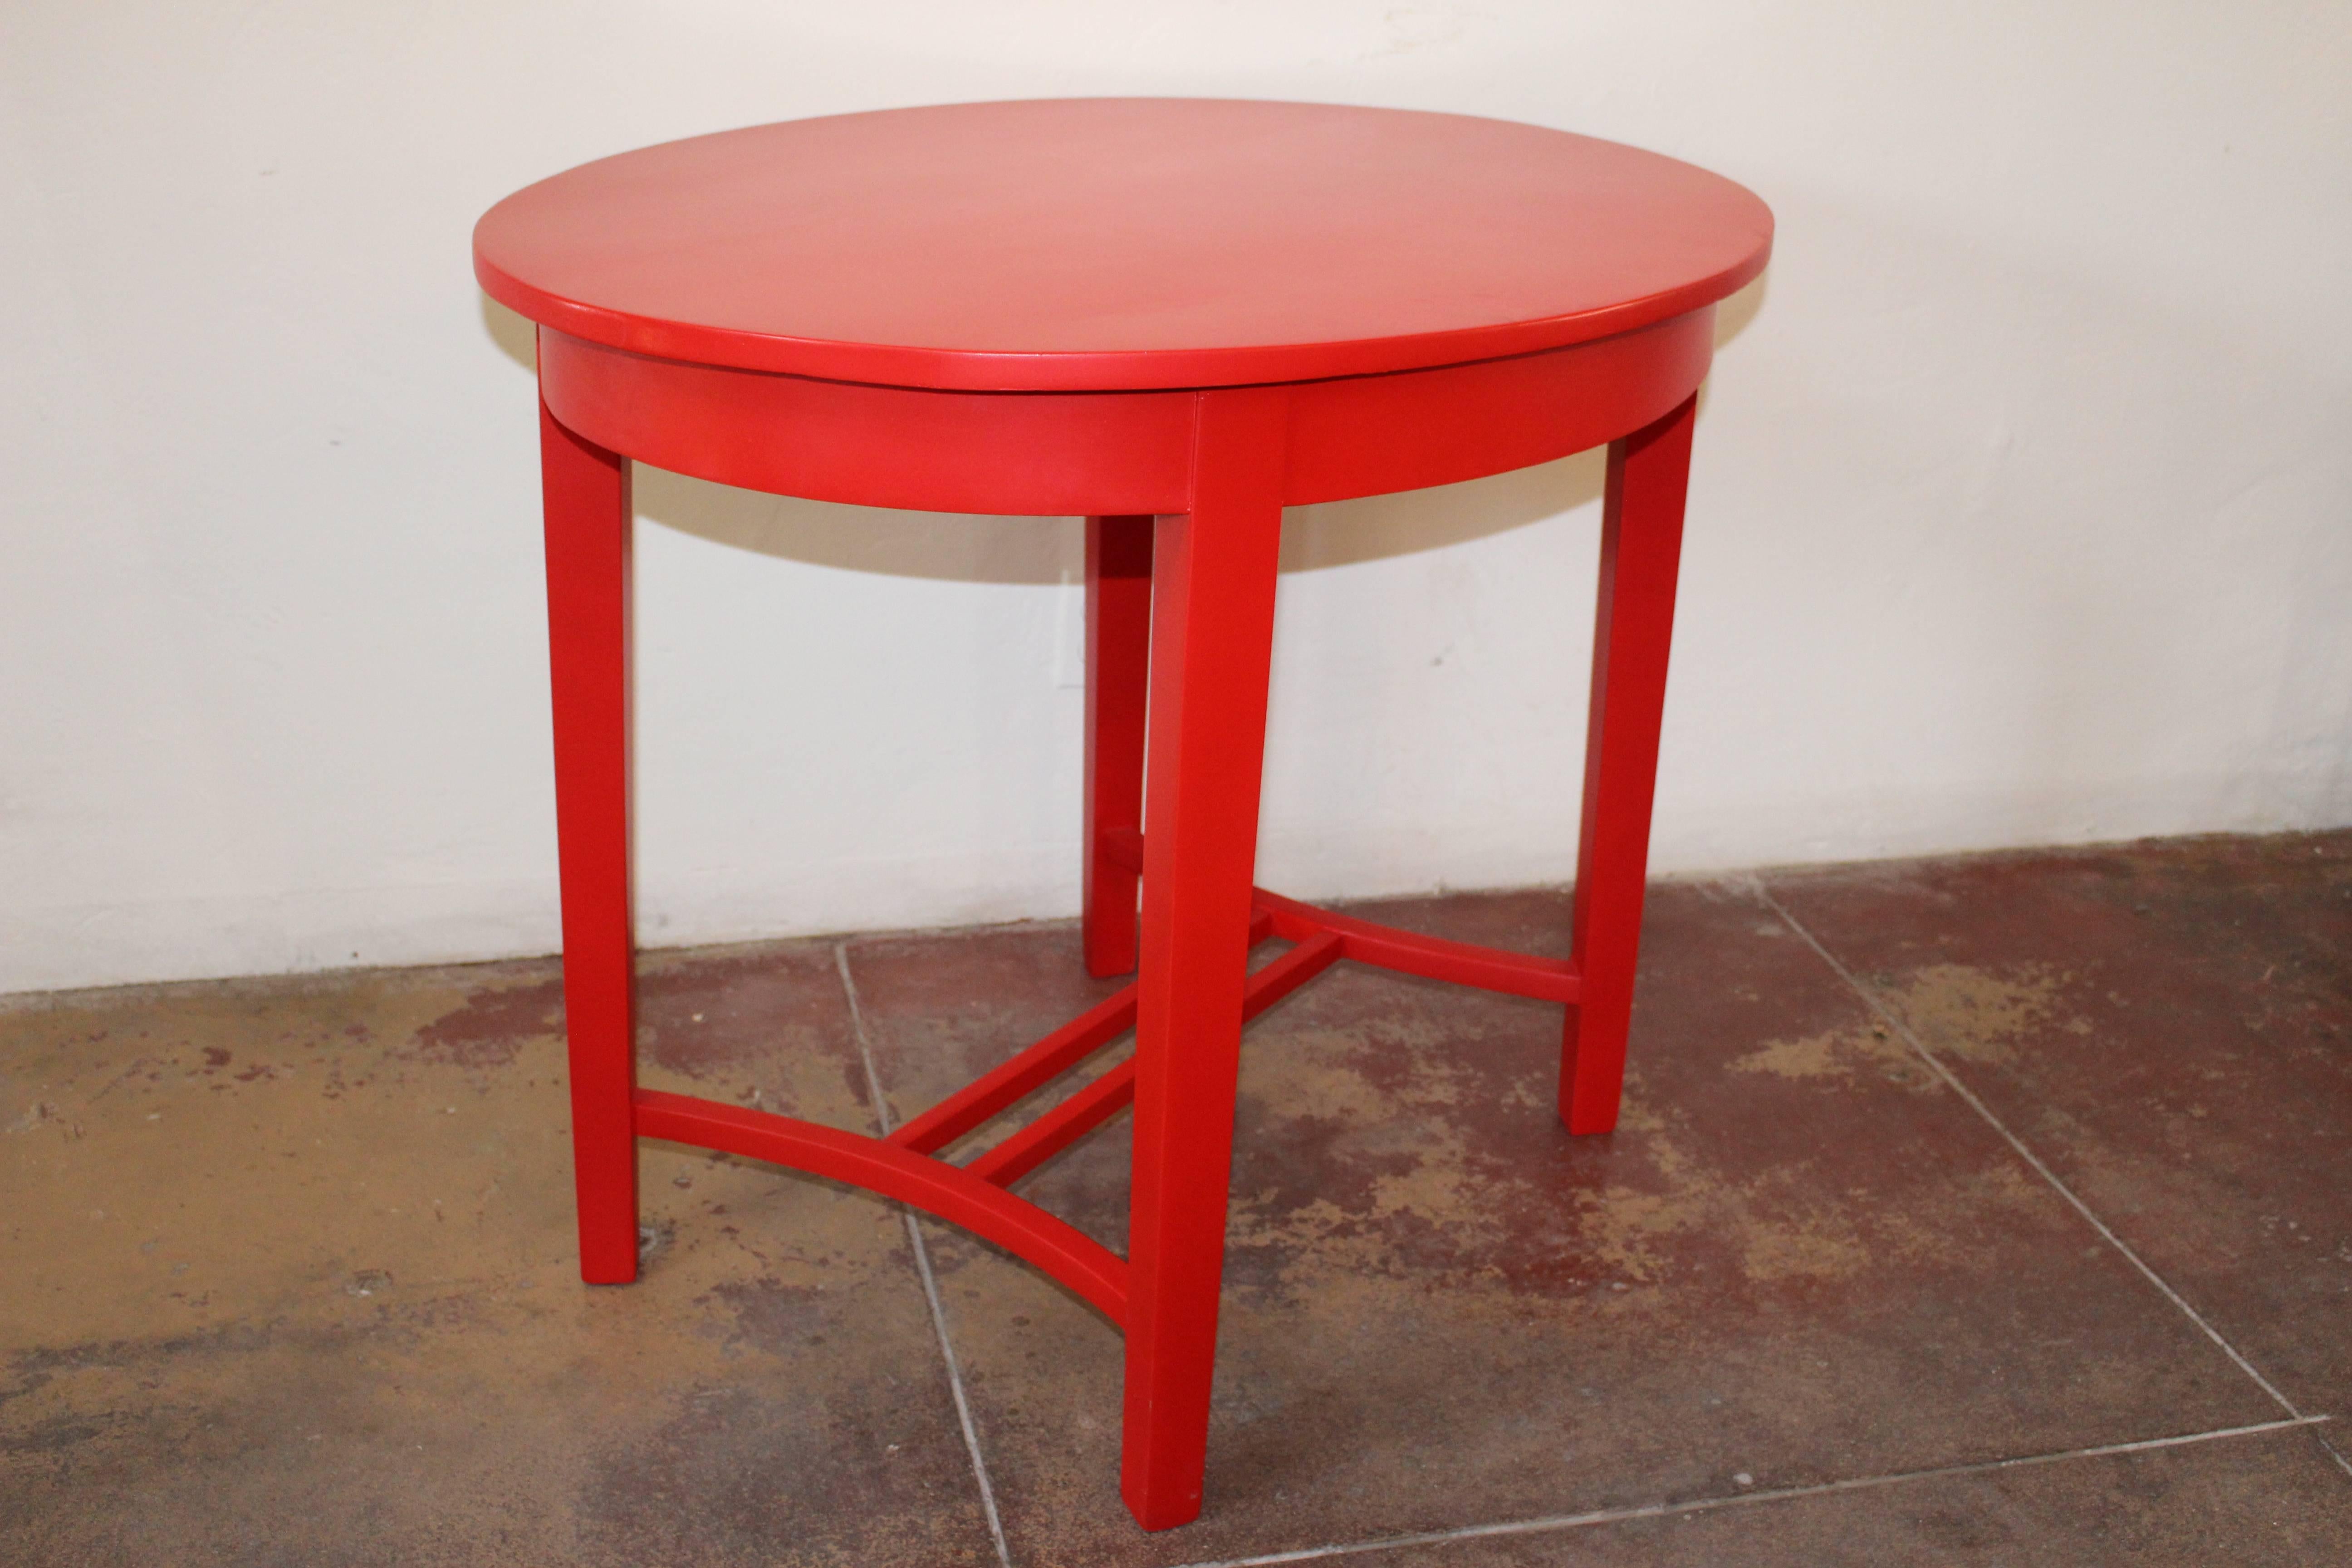 Red lacquered French Art Deco style side table.